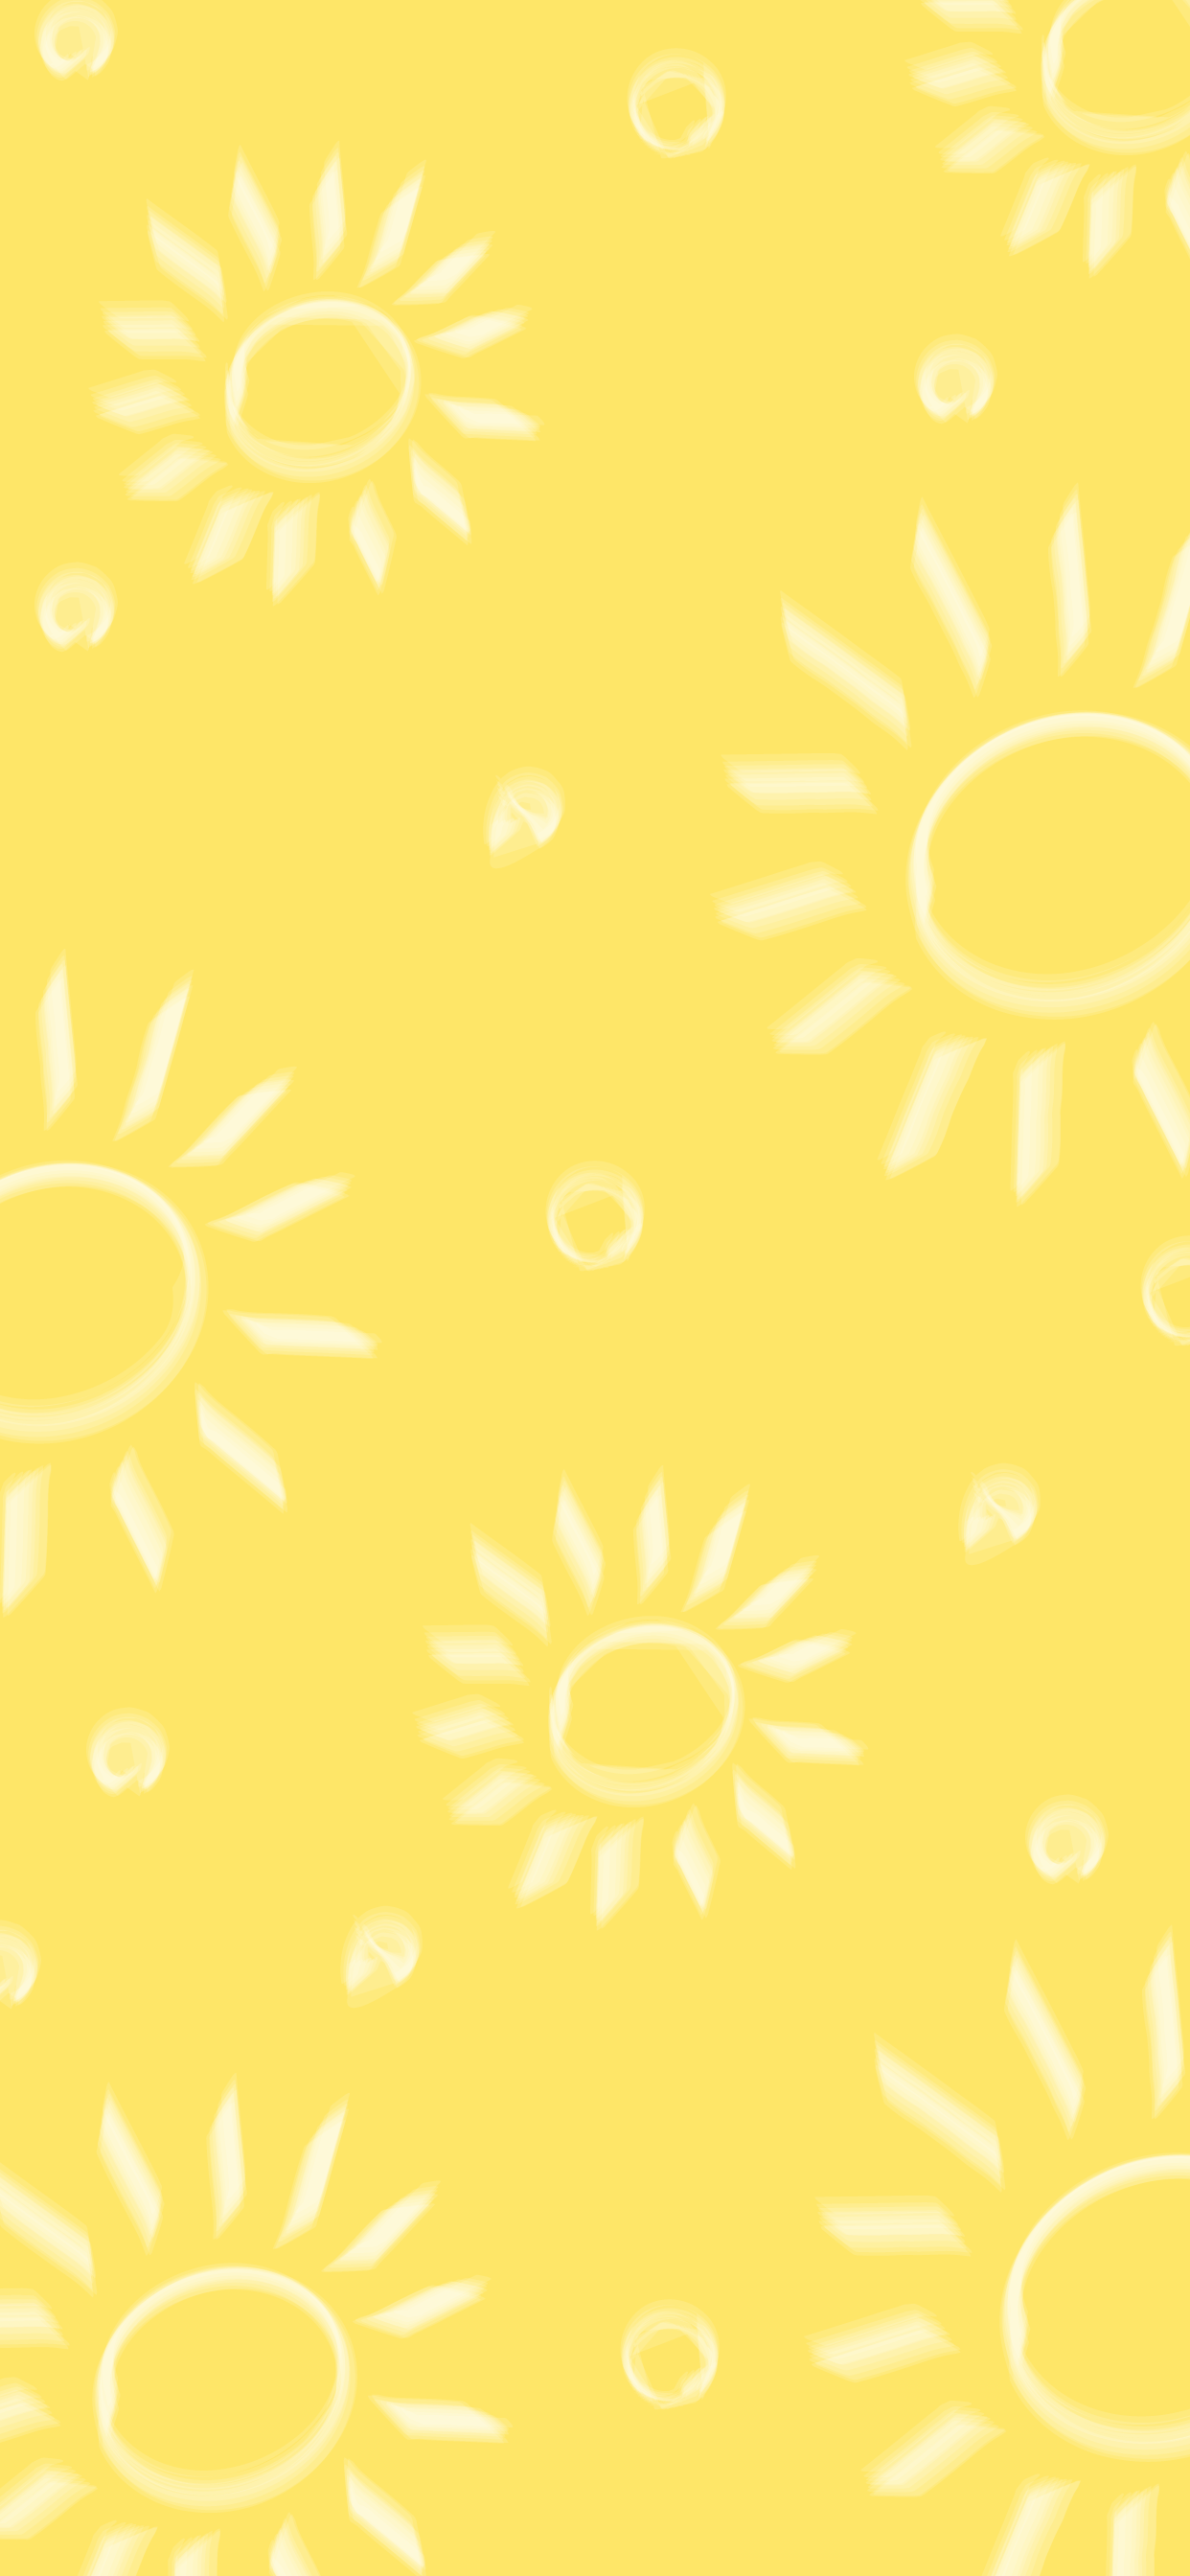 A yellow background with suns and circles - Sun, sunshine, sunlight